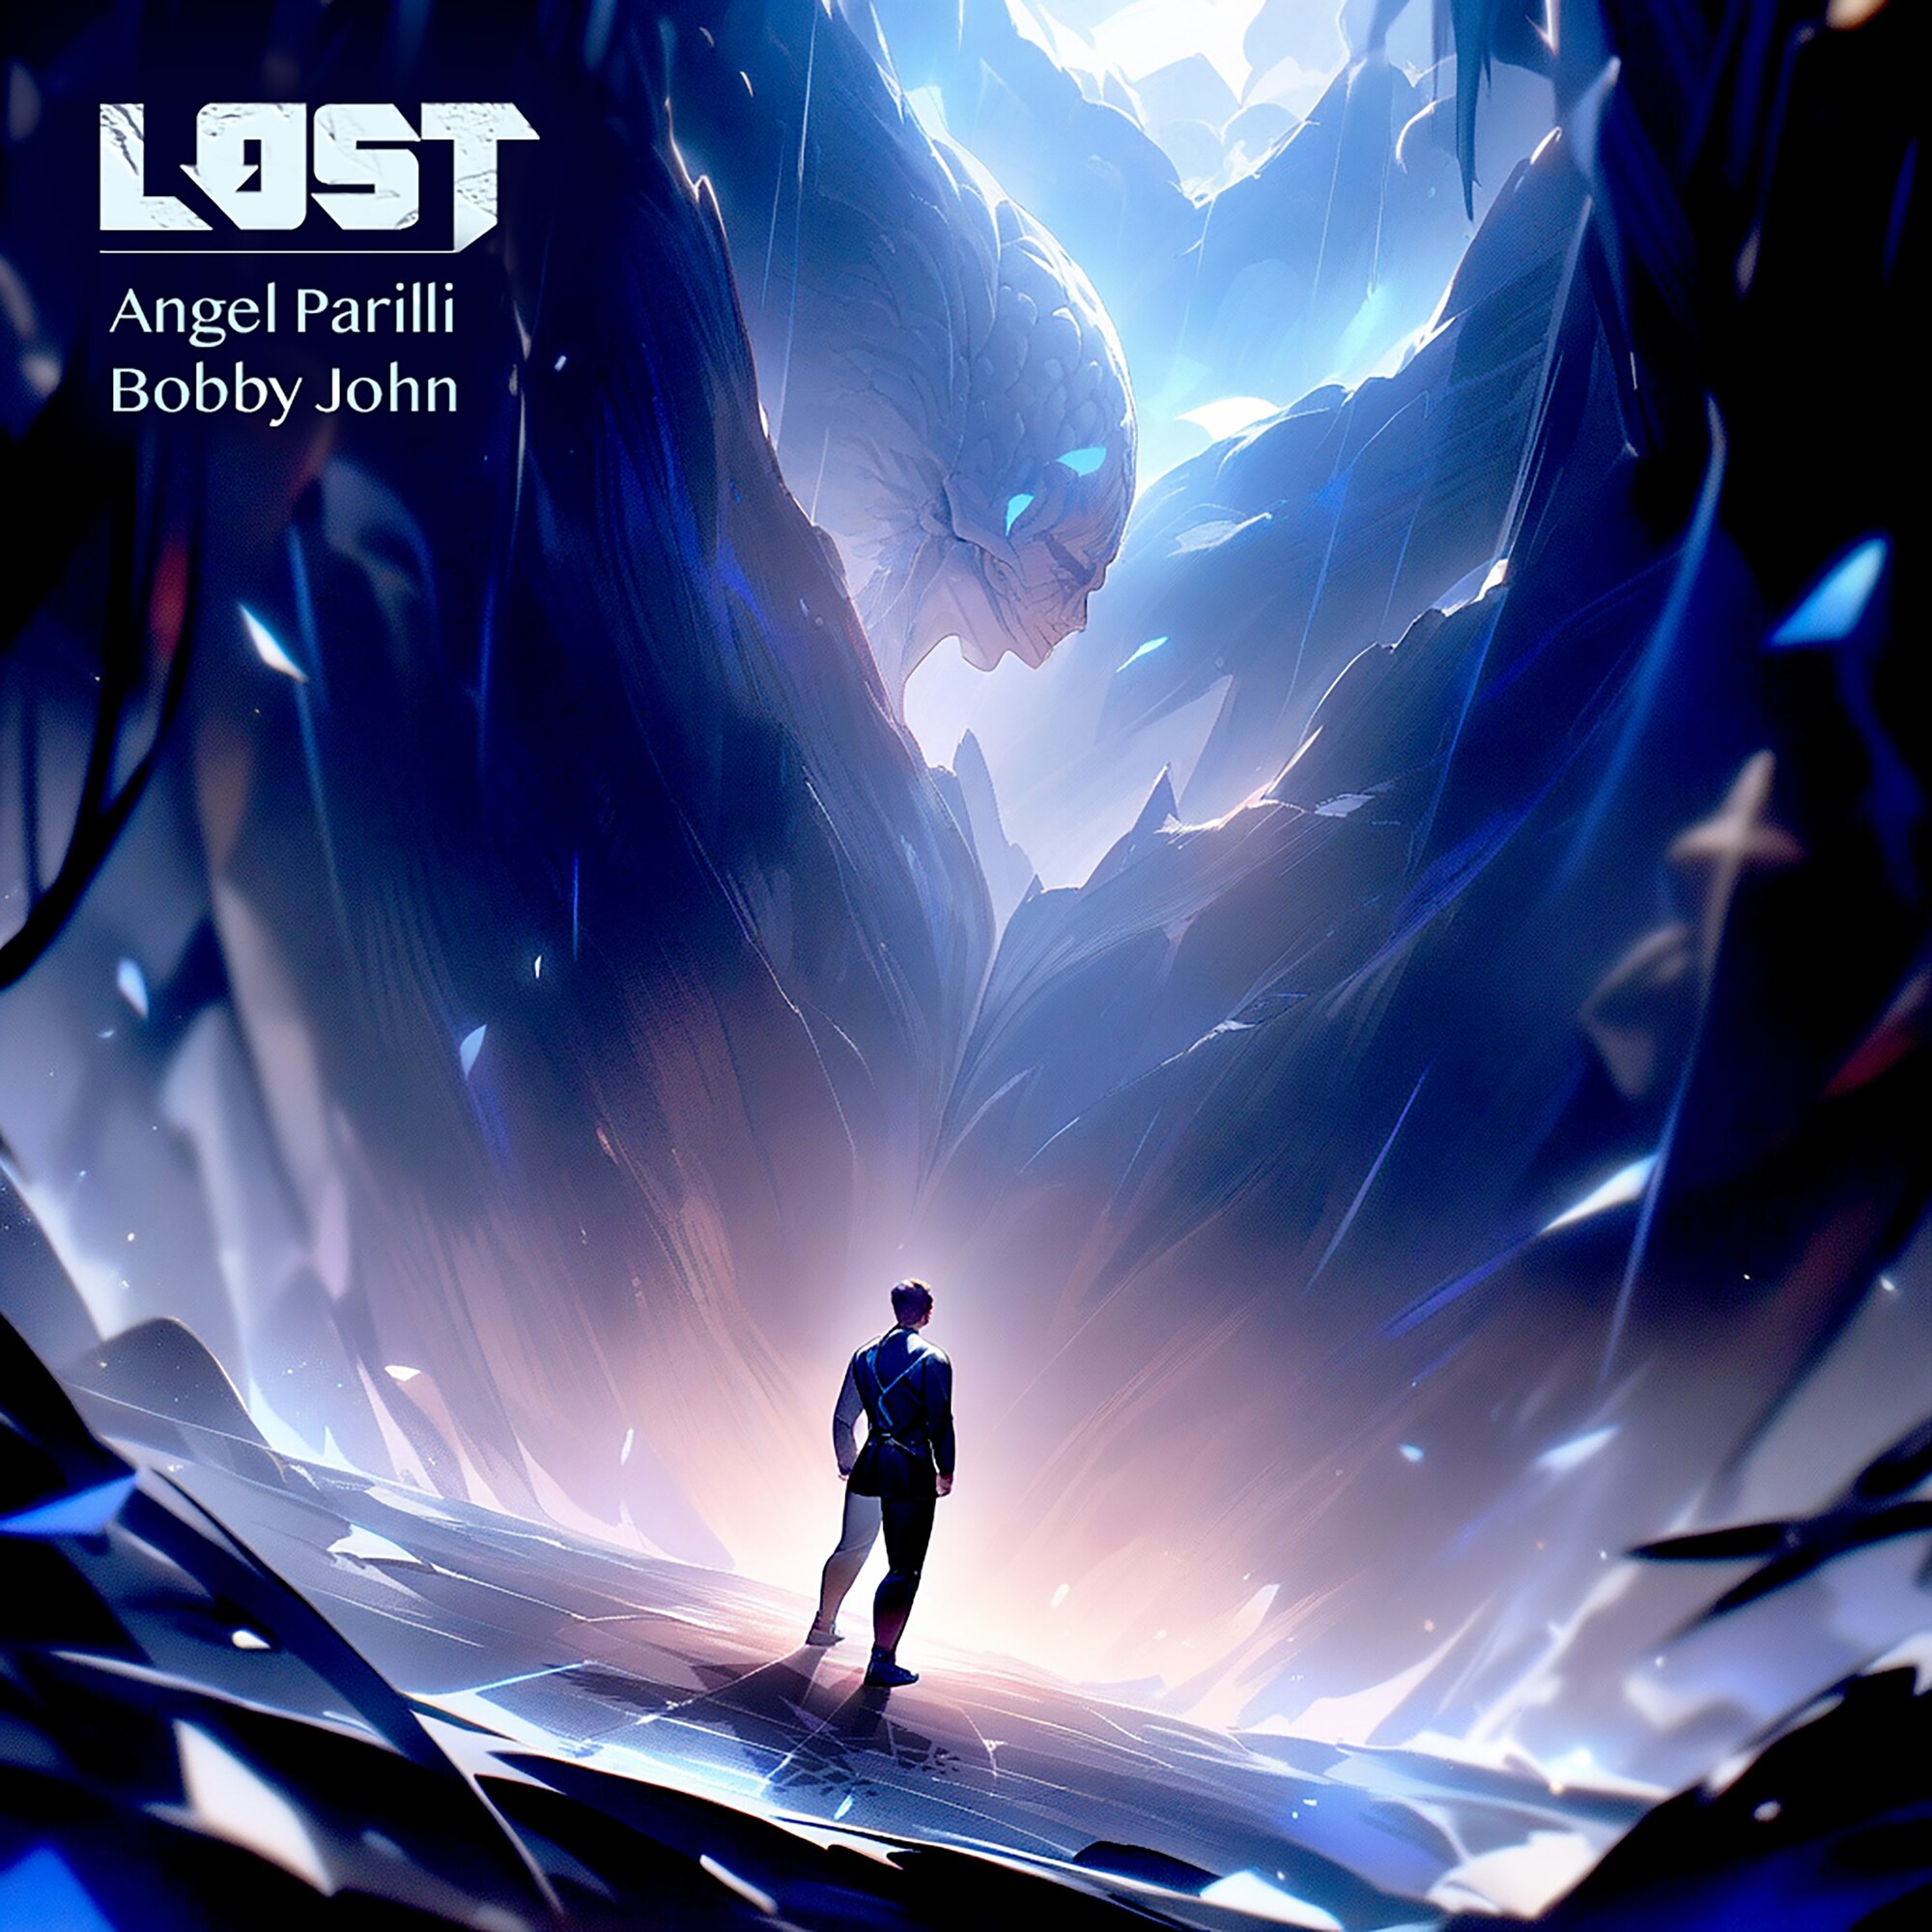 Distinct in Sound and High in Energy: This is Angel Parilli and Bobby John's 'Lost'